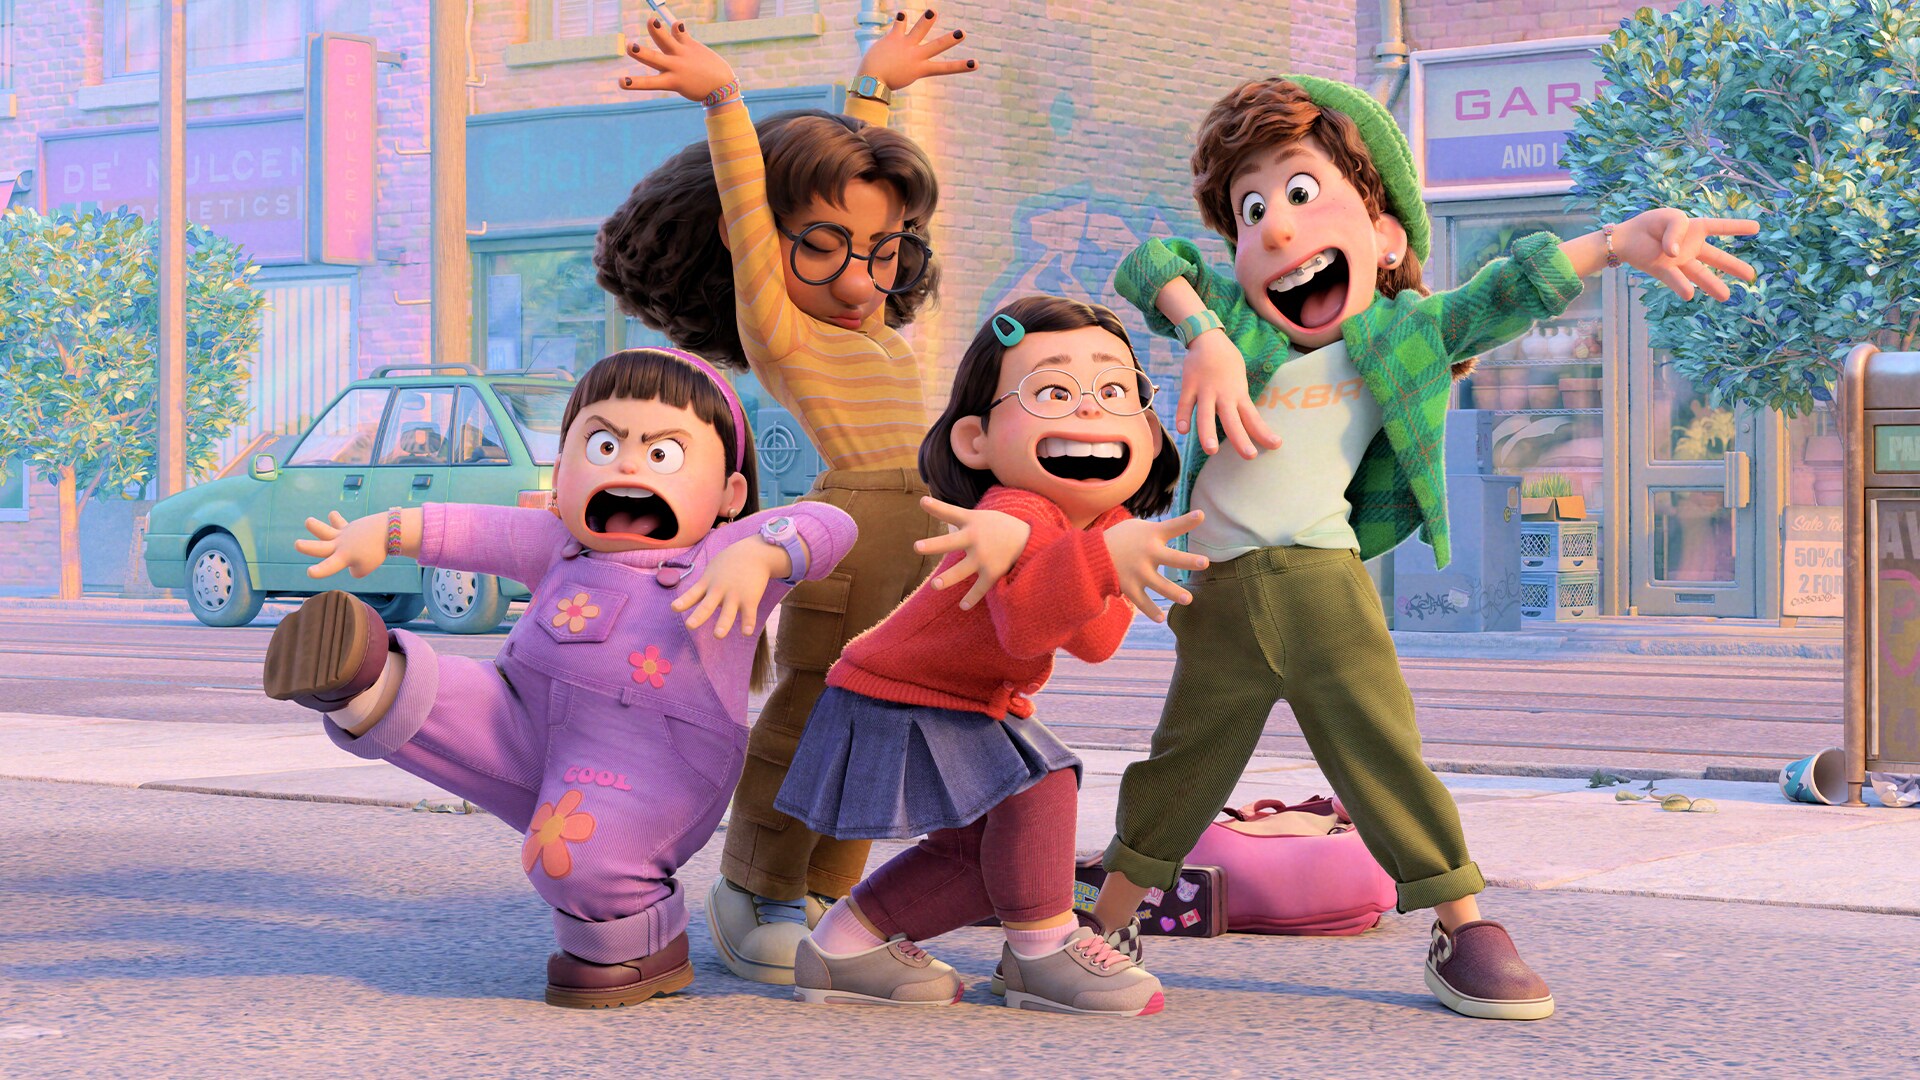 The character of Mei and her three friends cheer happily from the Disney and Pixar animated movie Turning Red.